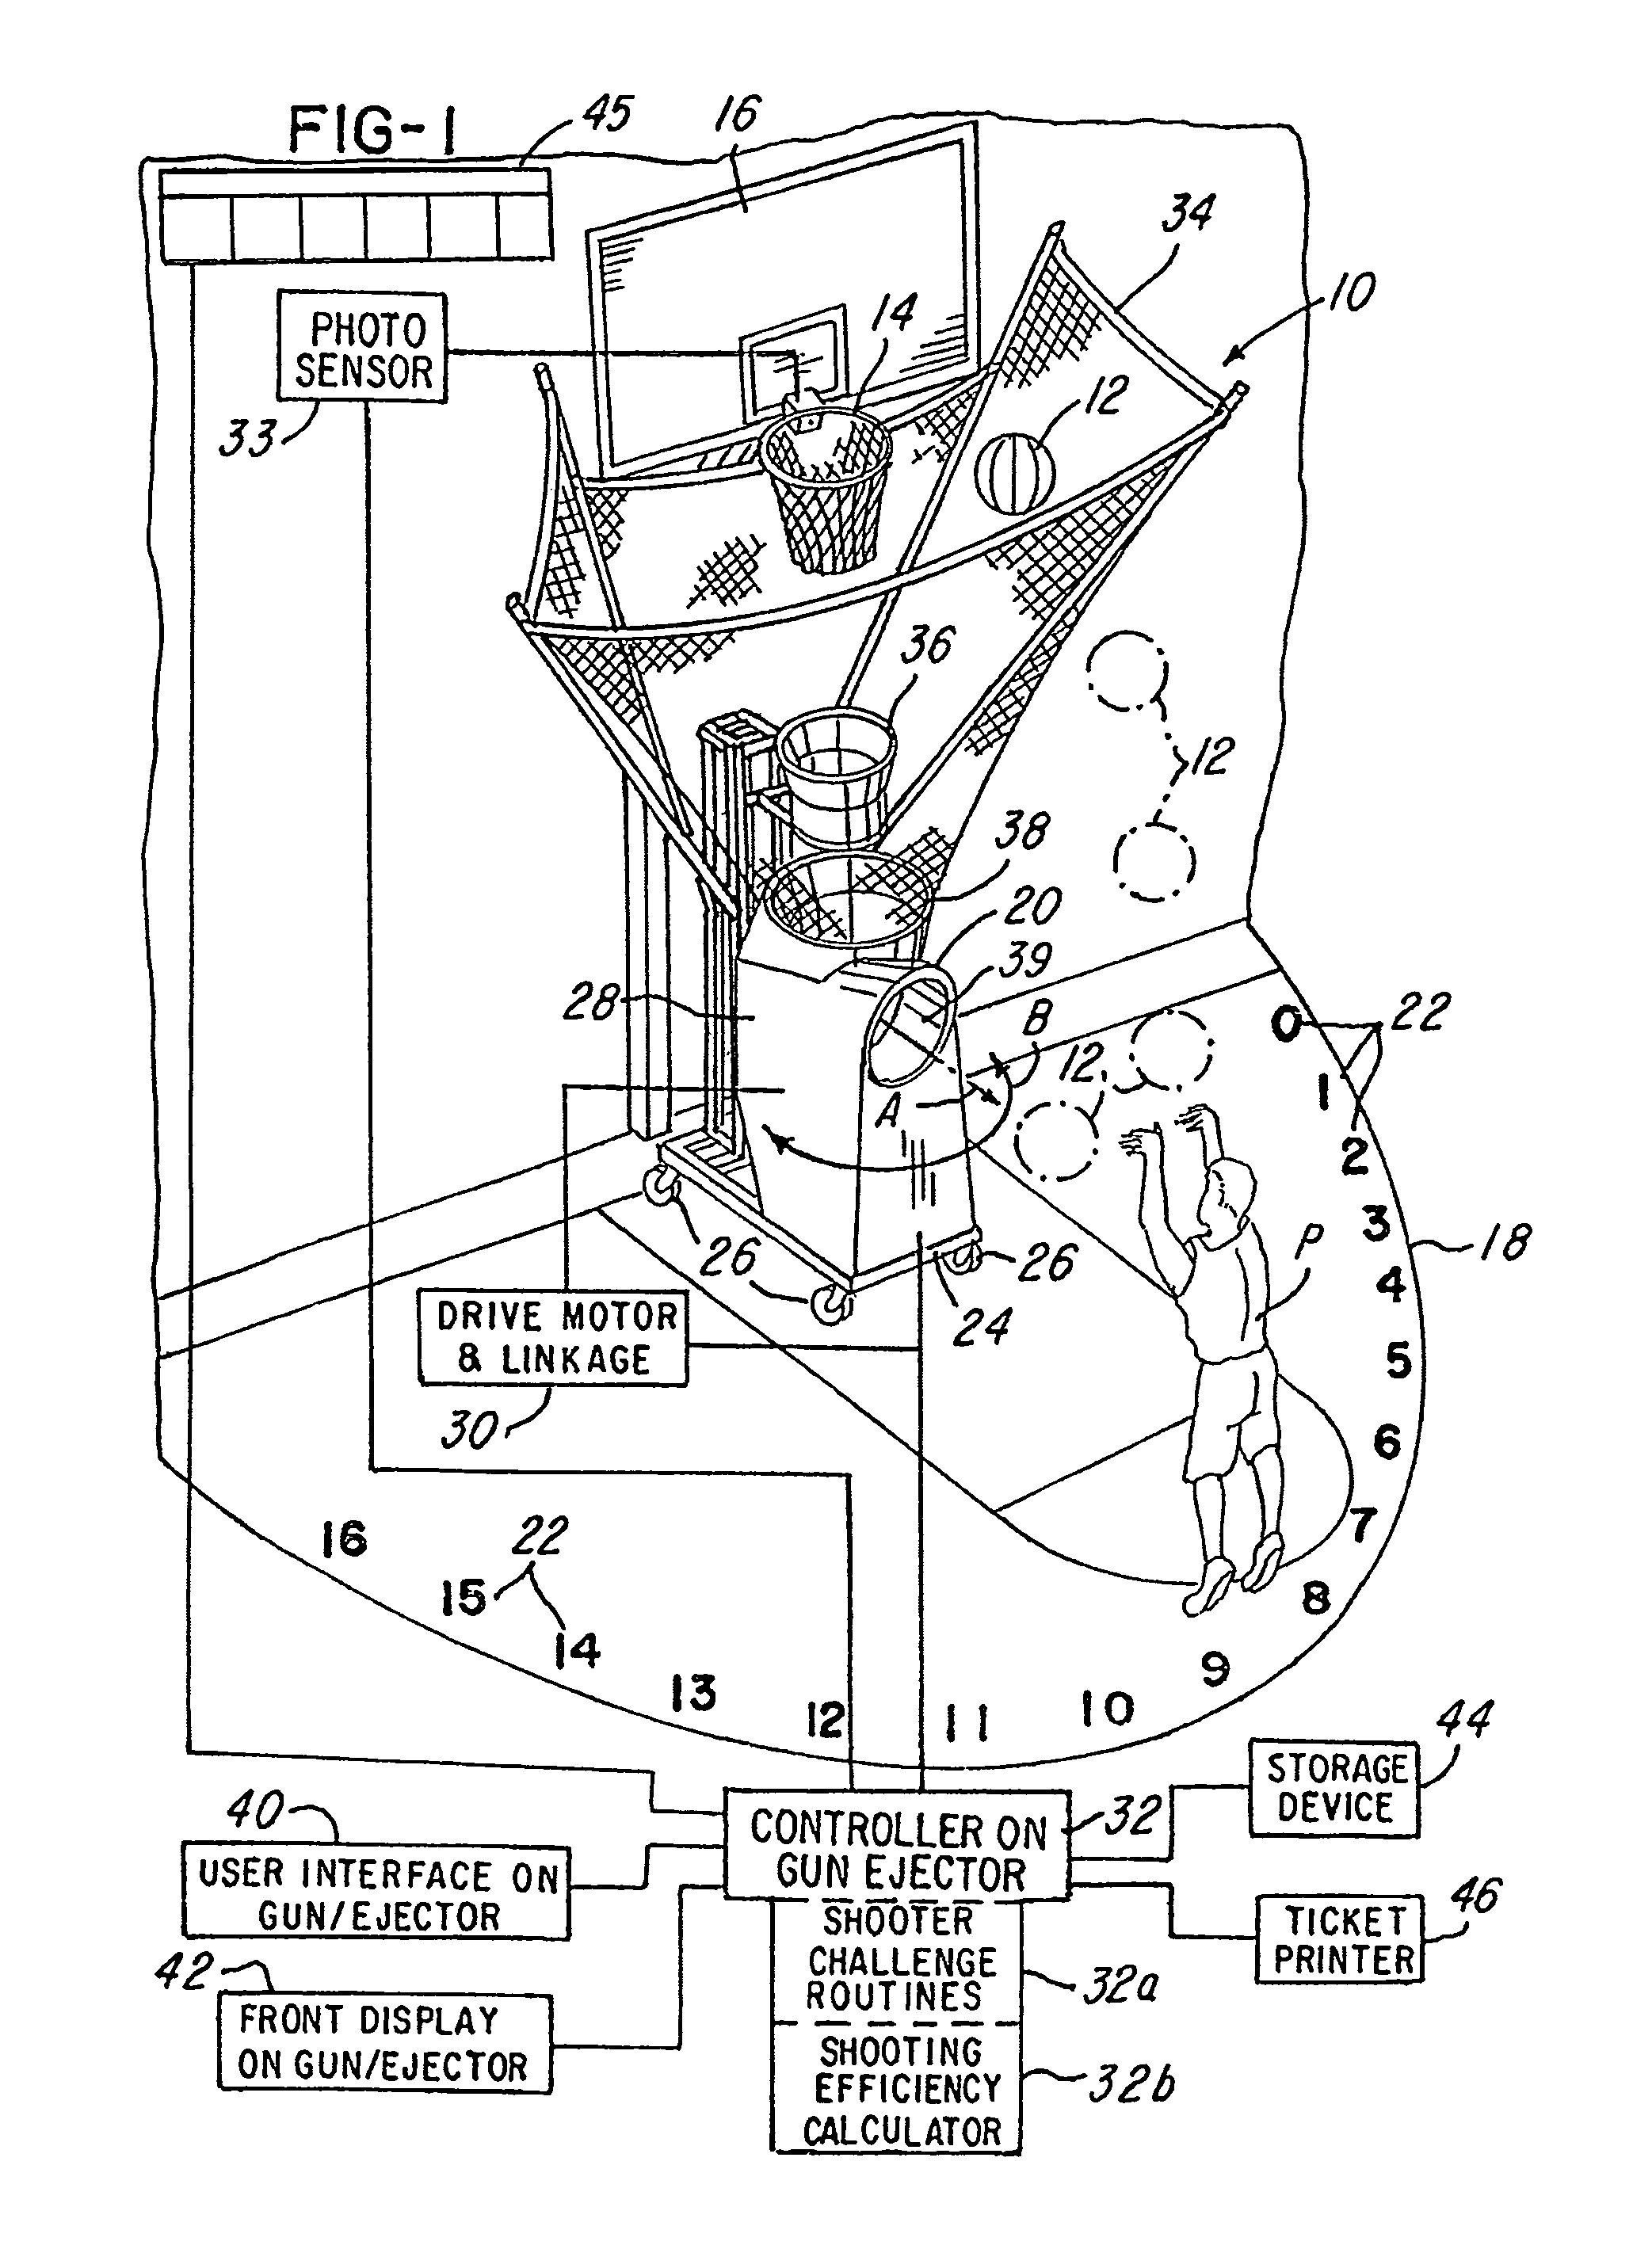 System and method for improving a basketball player's shooting including a detection and measurement system